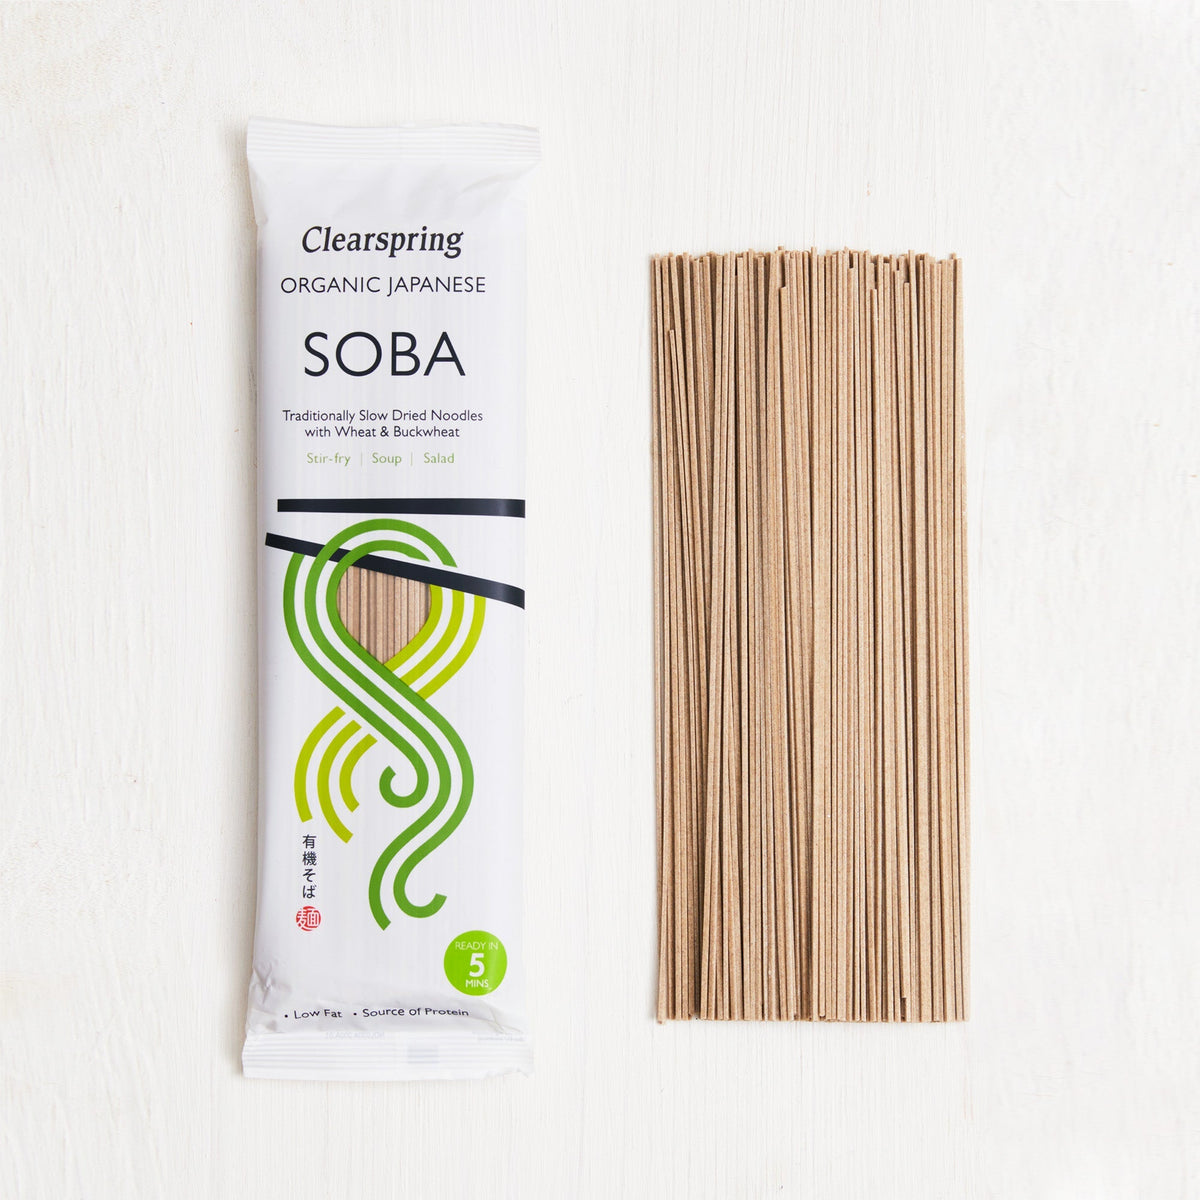 Clearspring Organic Japanese Soba Noodles (12 Pack)